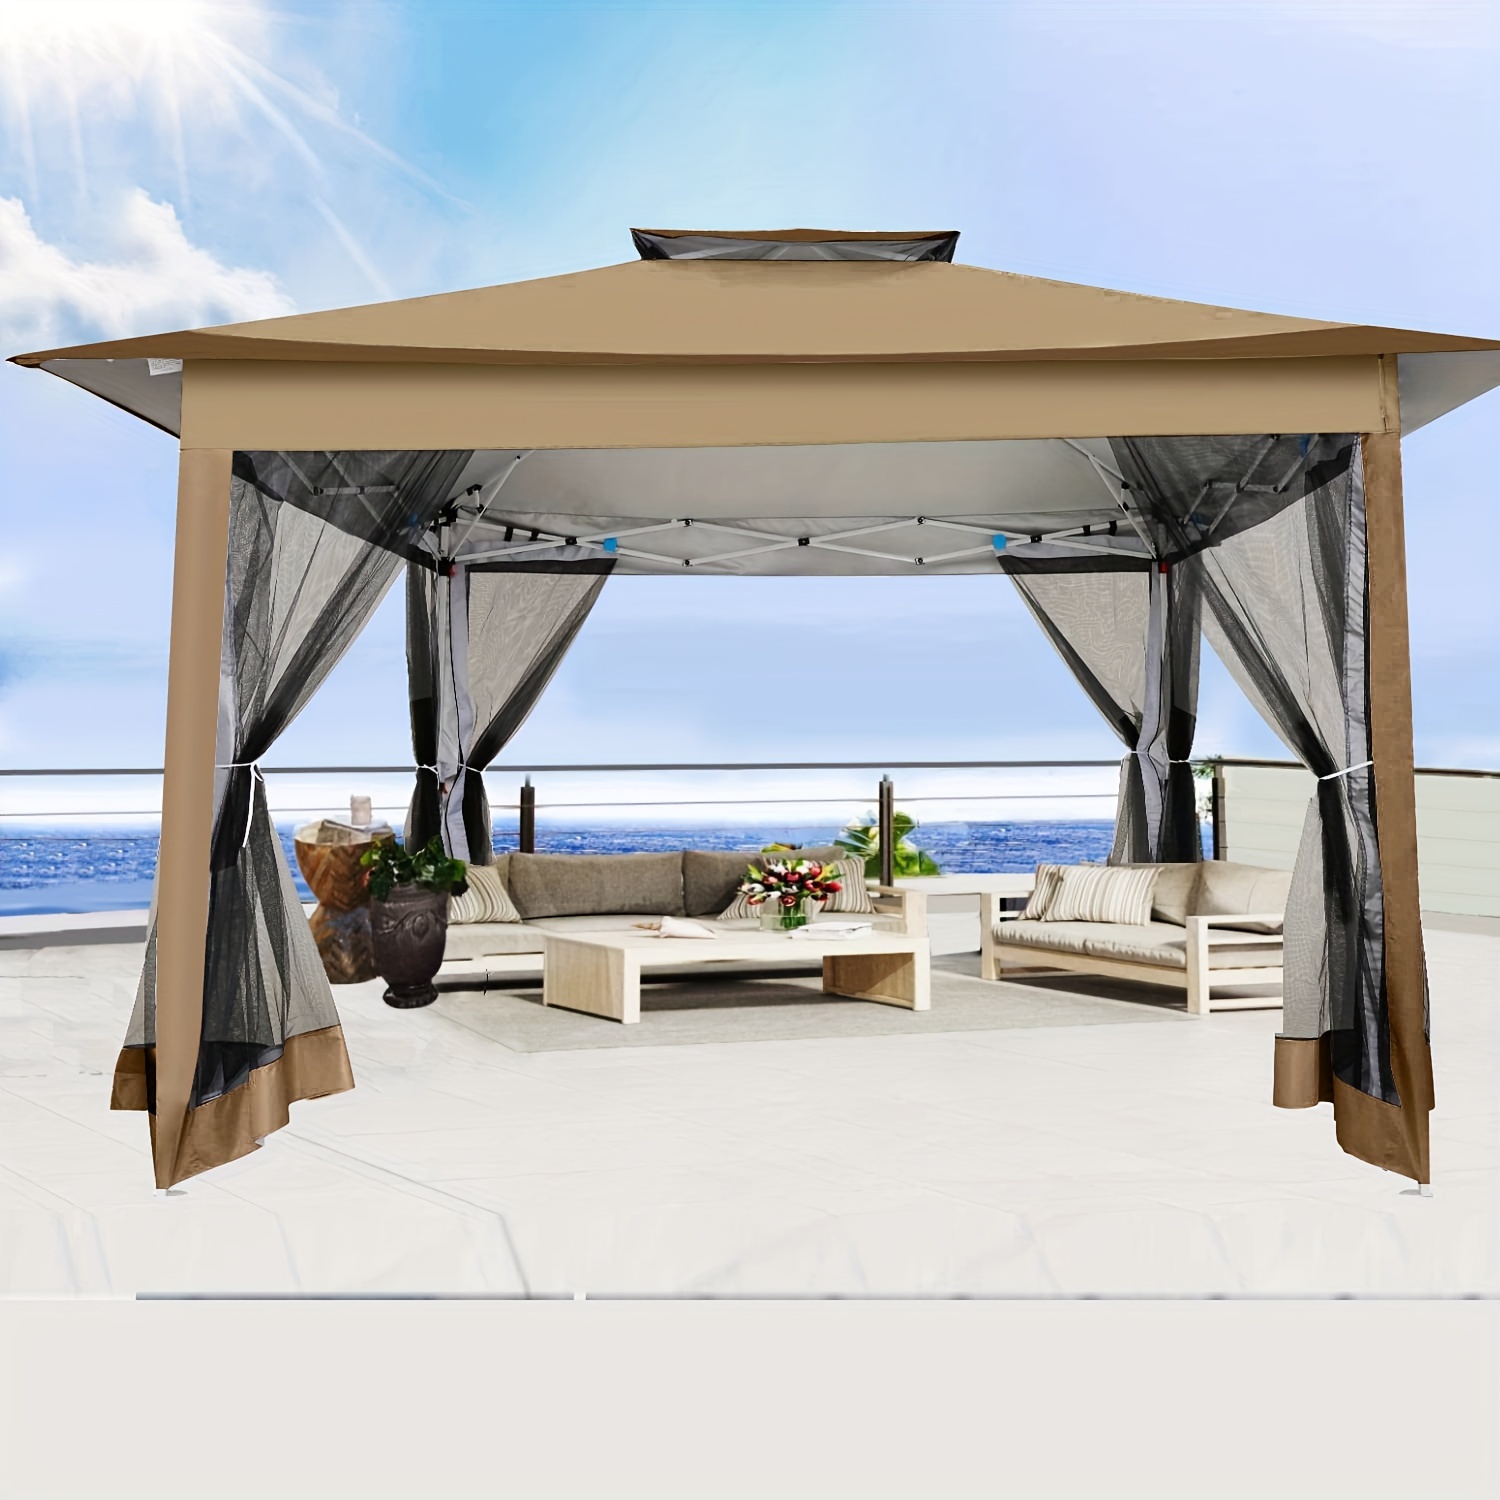 

Tooluck Gazebo 12x12 Outdoor Gazebo Pop Up Gazebo Canopy With Mosquito Netting Patio Gazebo Canopy Tent With 2-tiered Vented Top 3 Adjustable Height And 144 Square Ft Of Shade